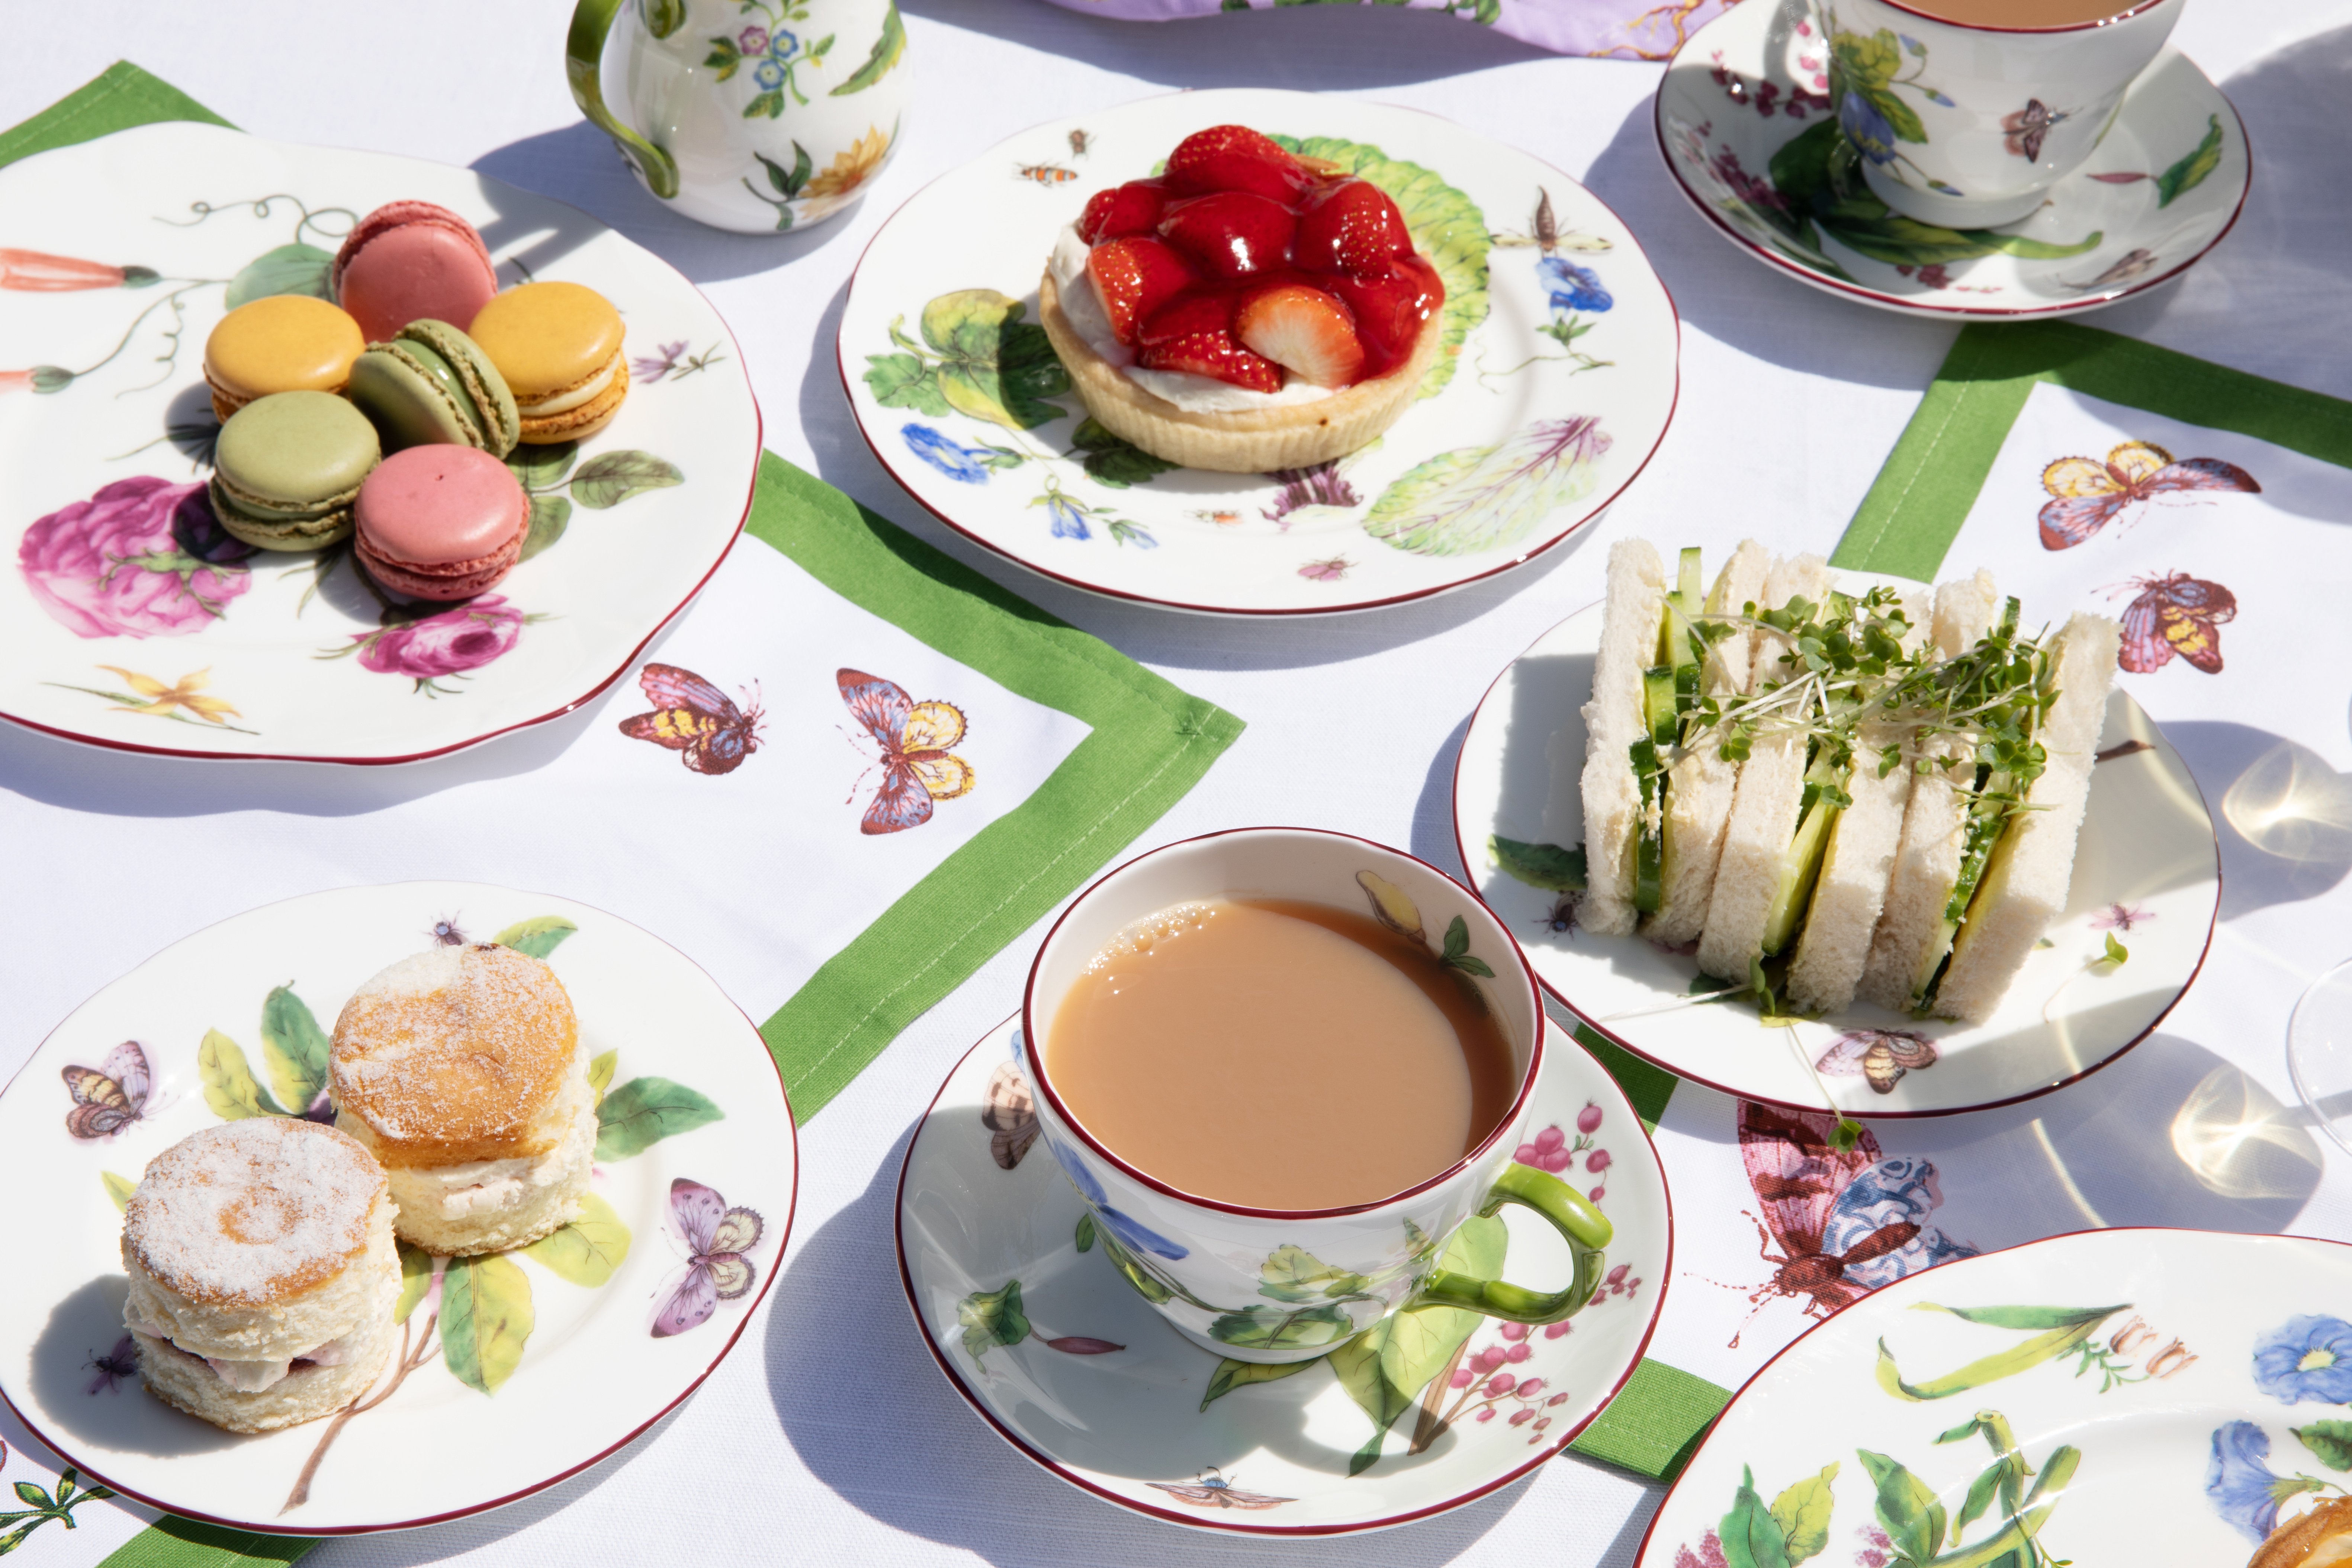 The Chelsea Garden green and white napkins being used with Chelsea Porcelain plates for a picnic